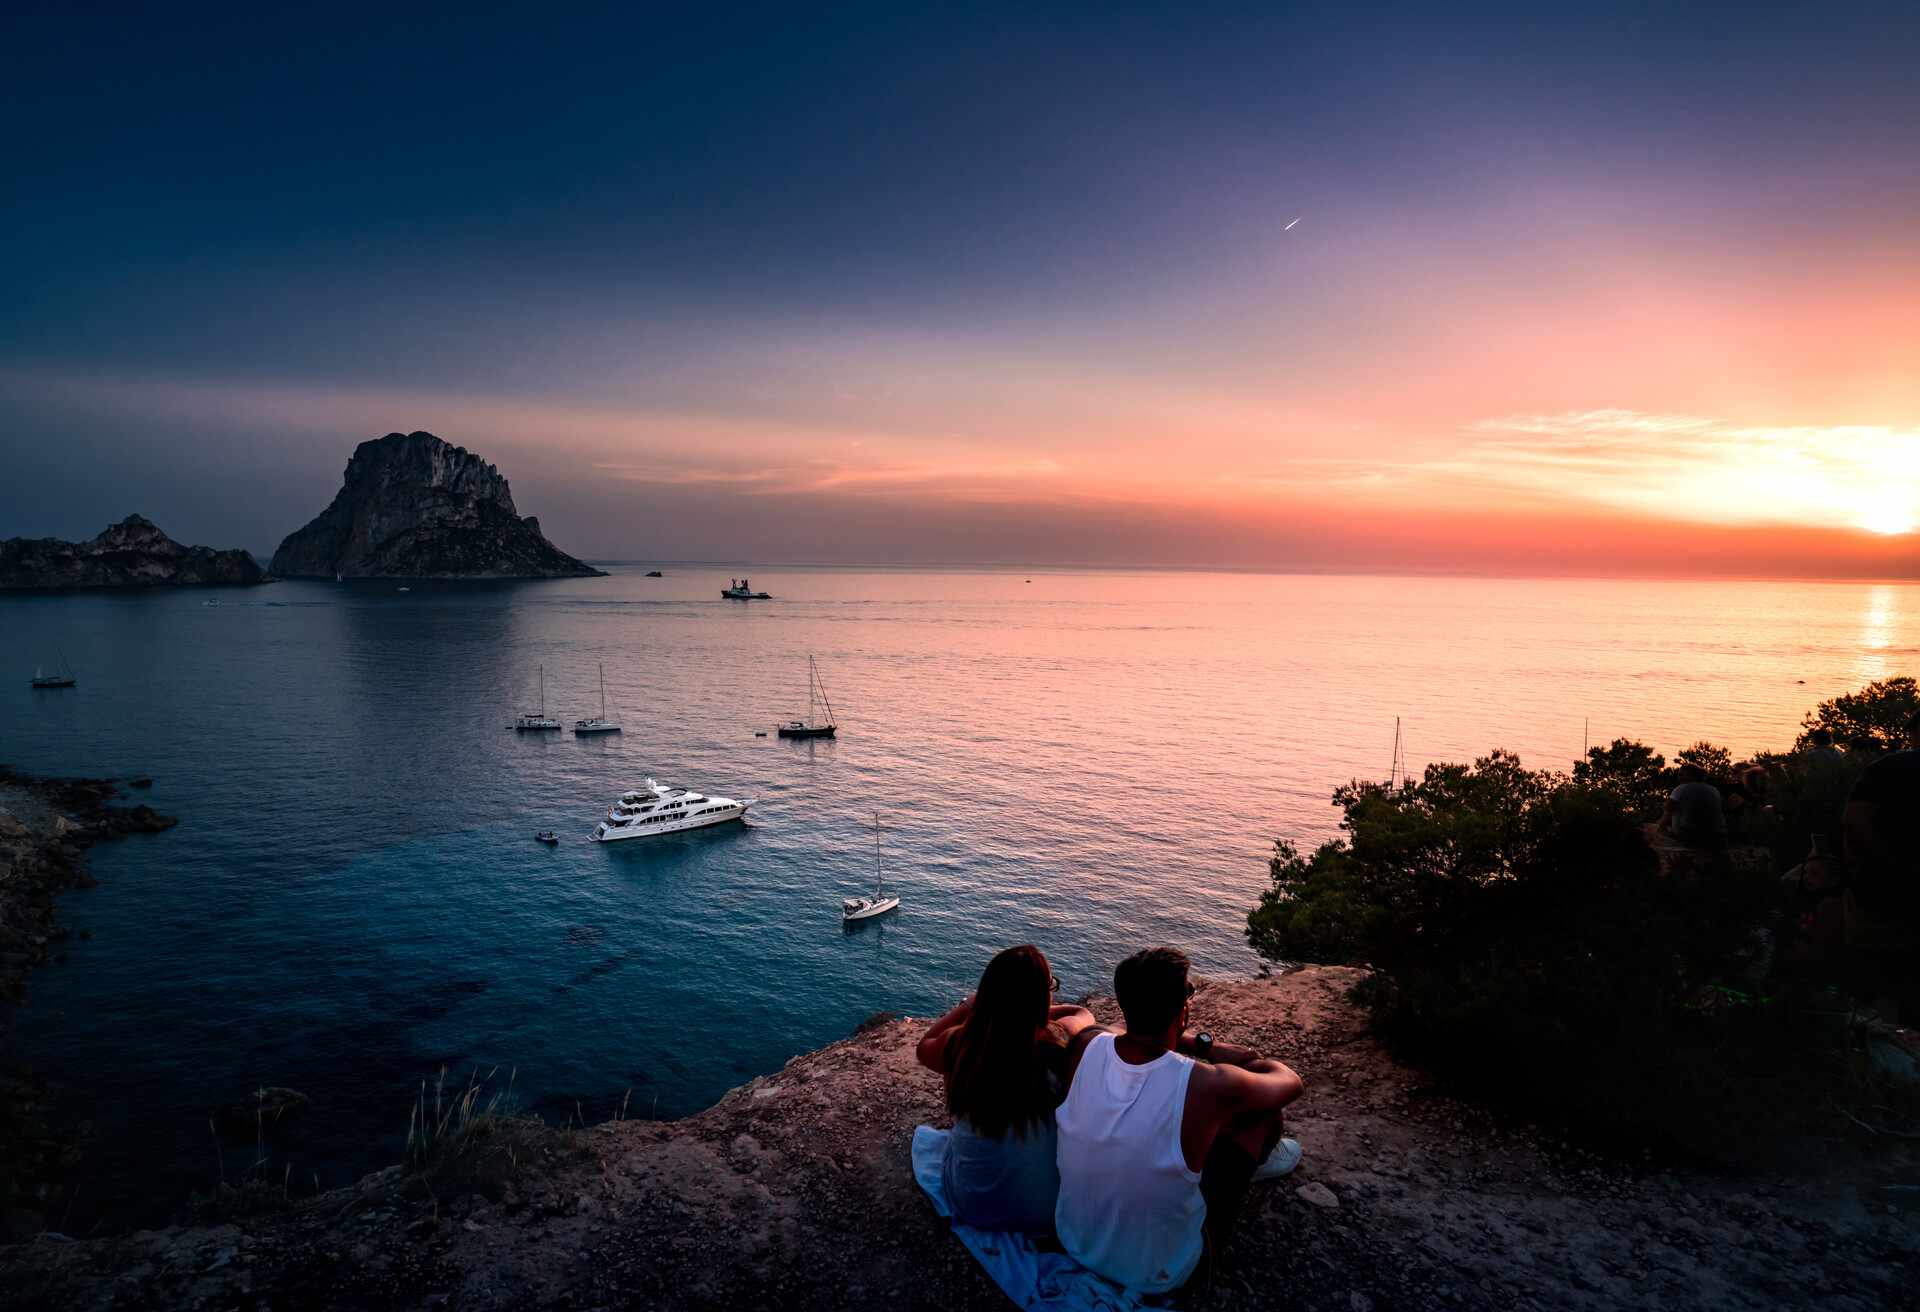 Woman and man back to the front watching a beautiful sunset at the beach. The beach is called Es Vedra, in Ibiza and belongs to balearic islands, in Spain